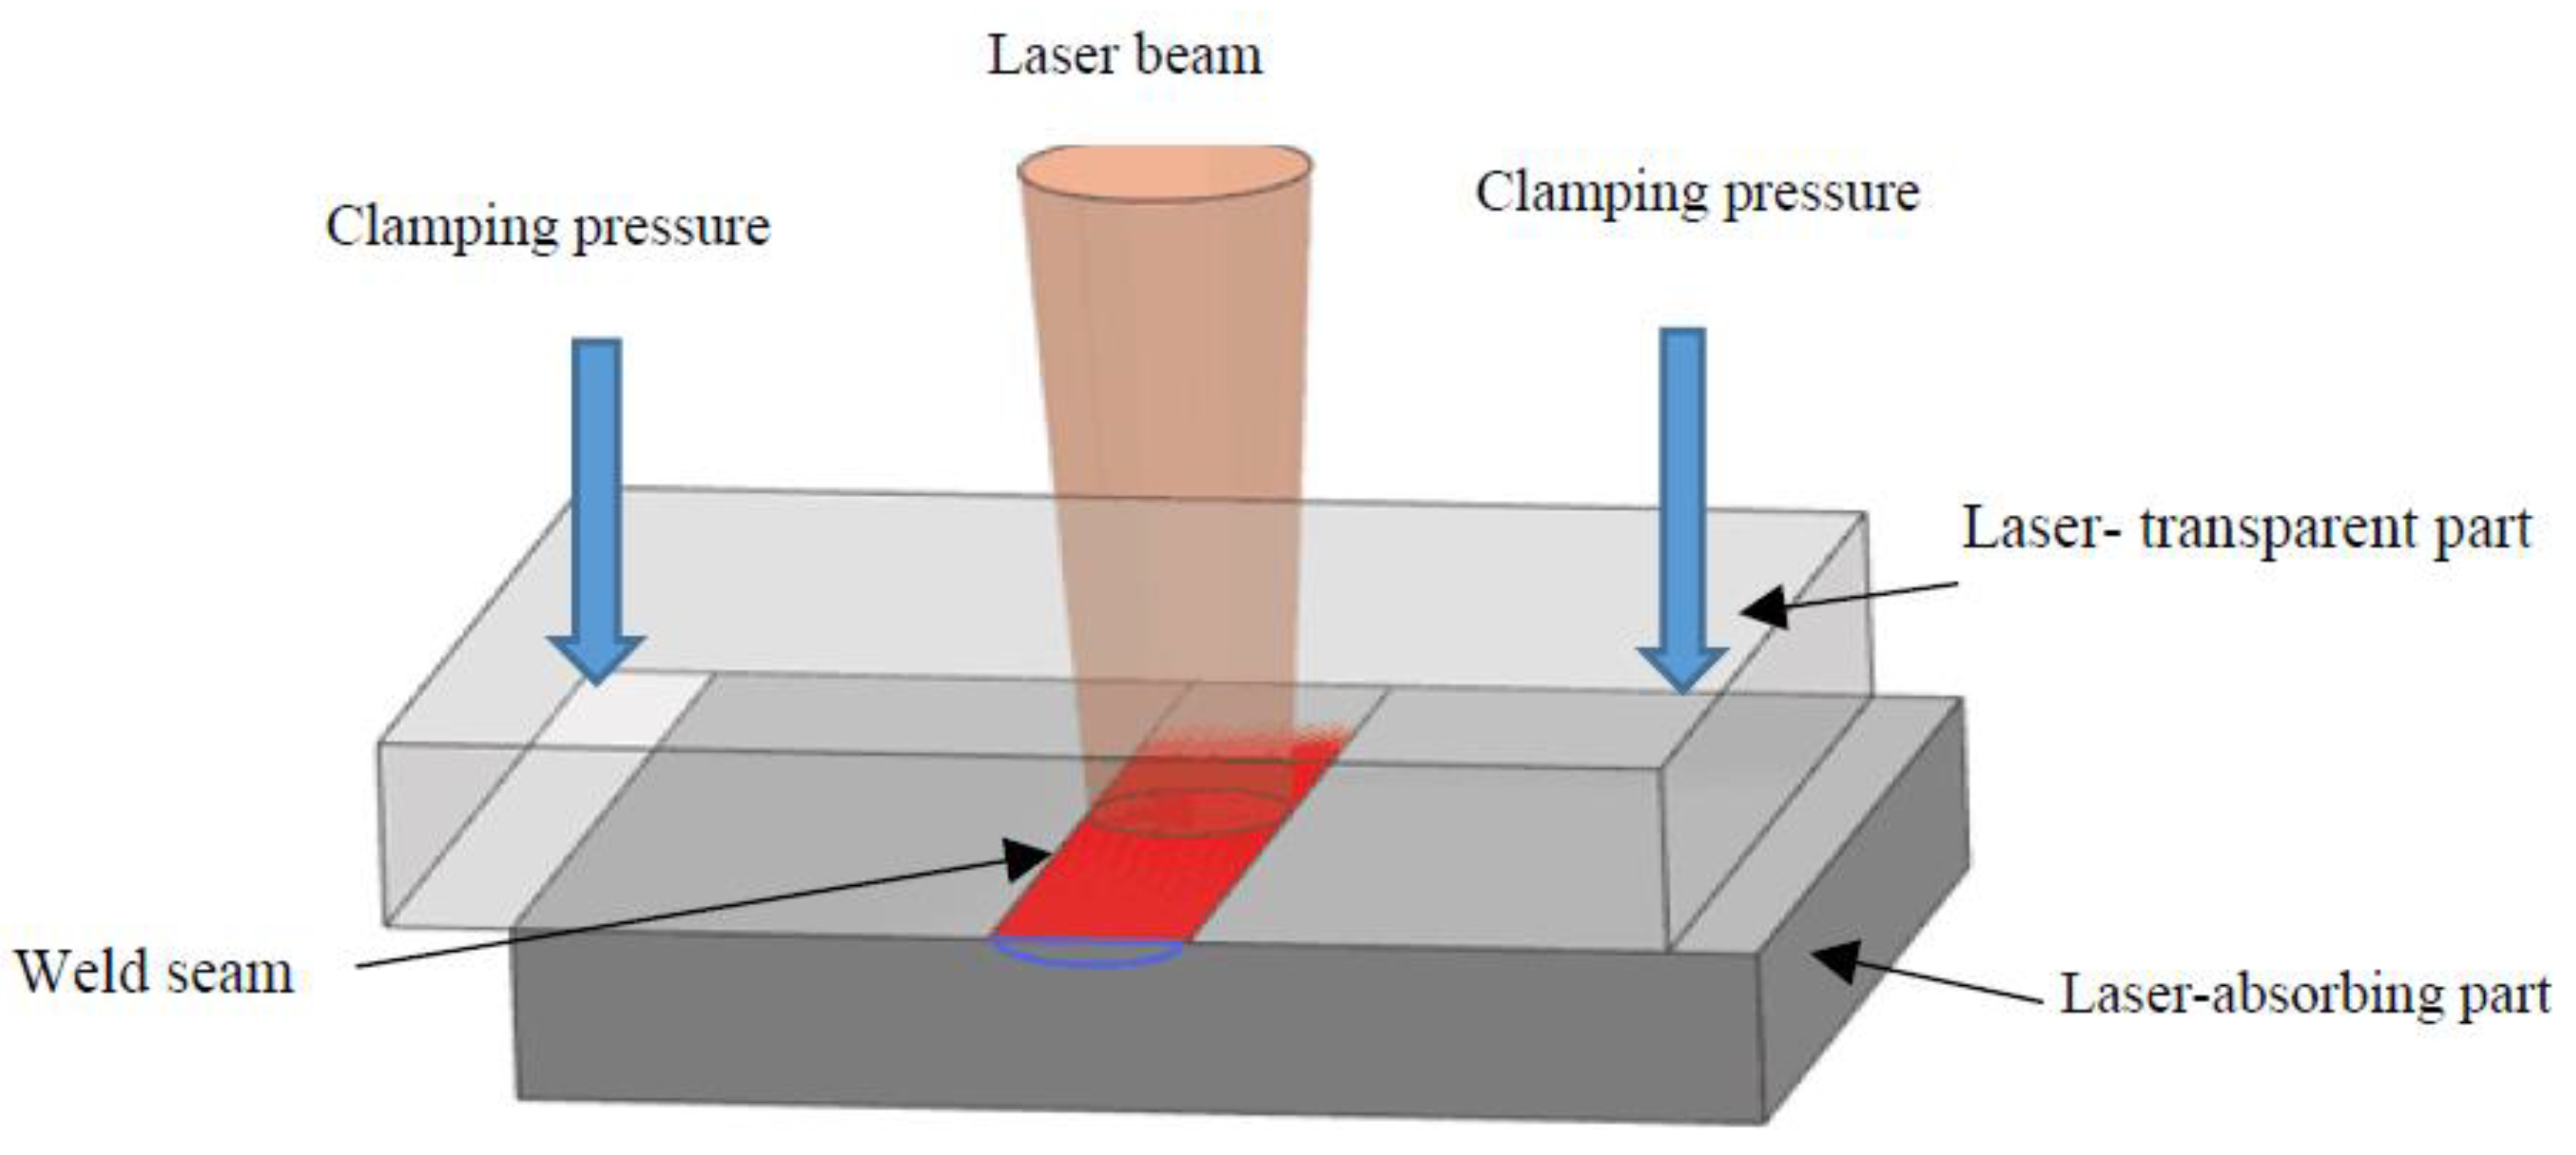 Schematic of laser energy absorption in the conduction mode and